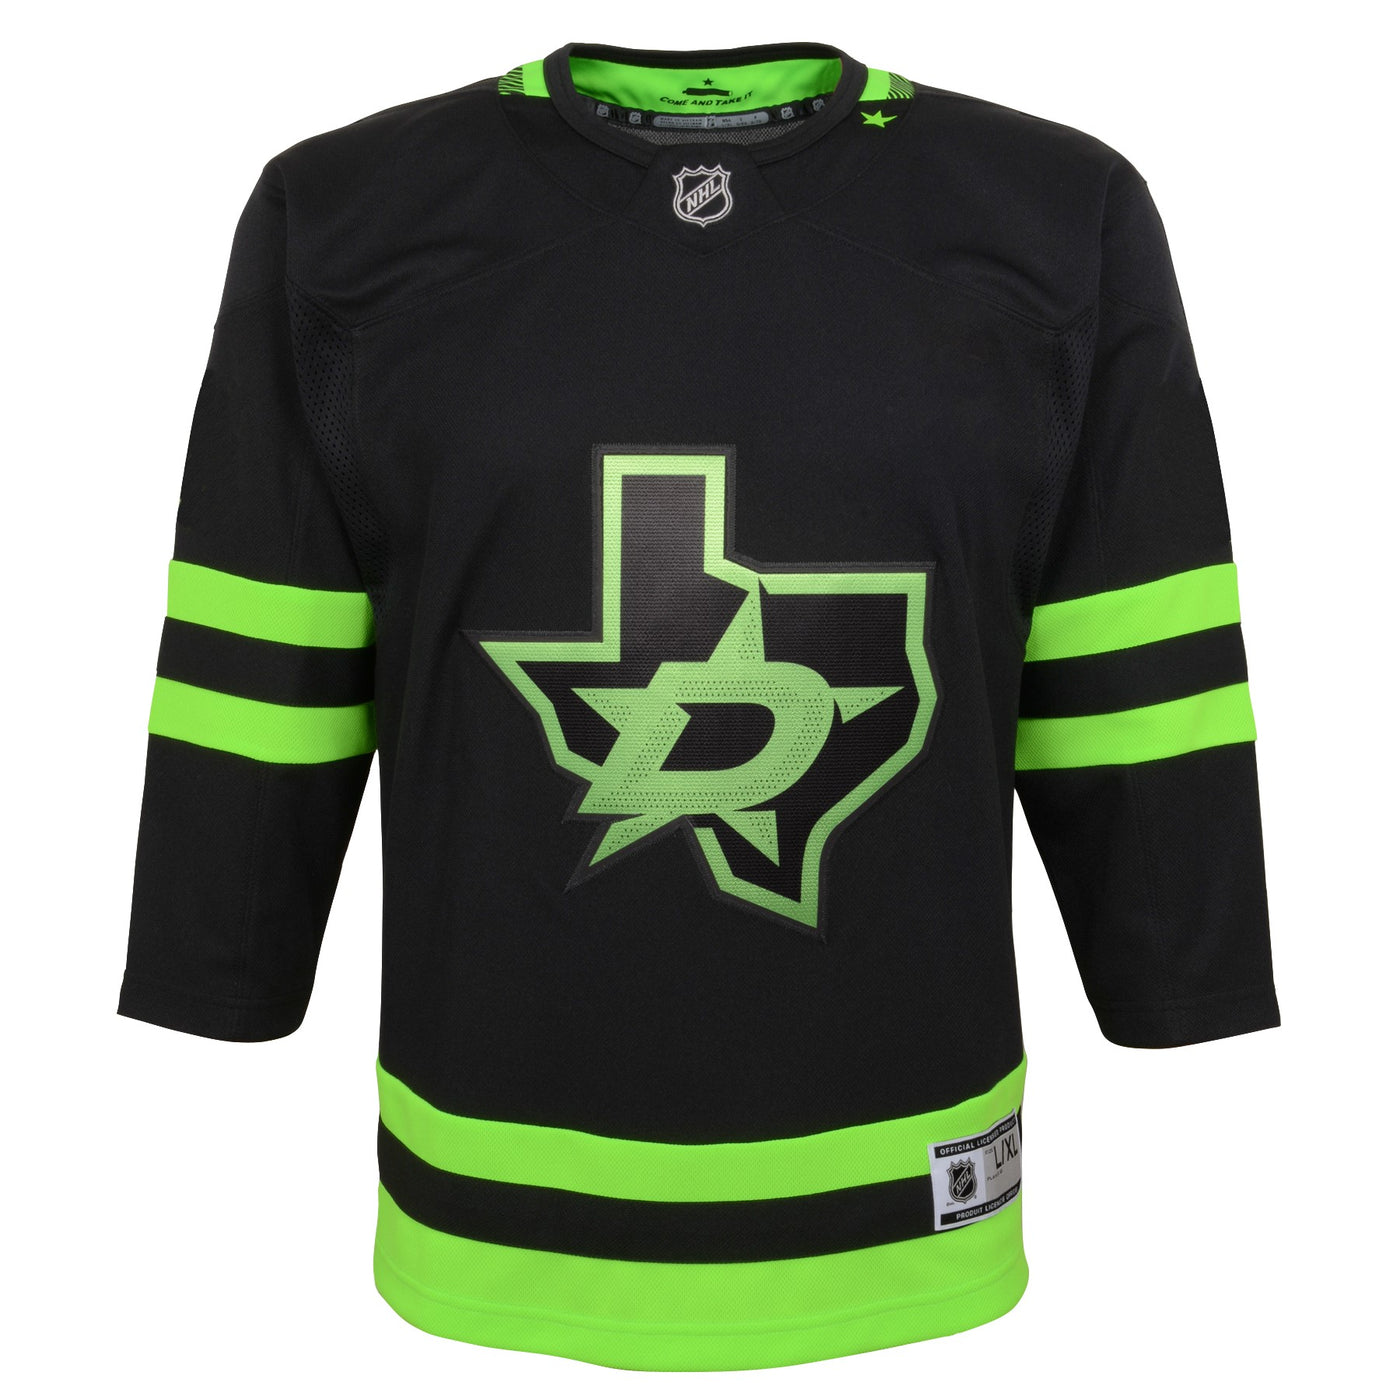 DALLAS STARS OUTERSTUFF KIDS BLACKOUT 3RD JERSEY - FRONT VIEW